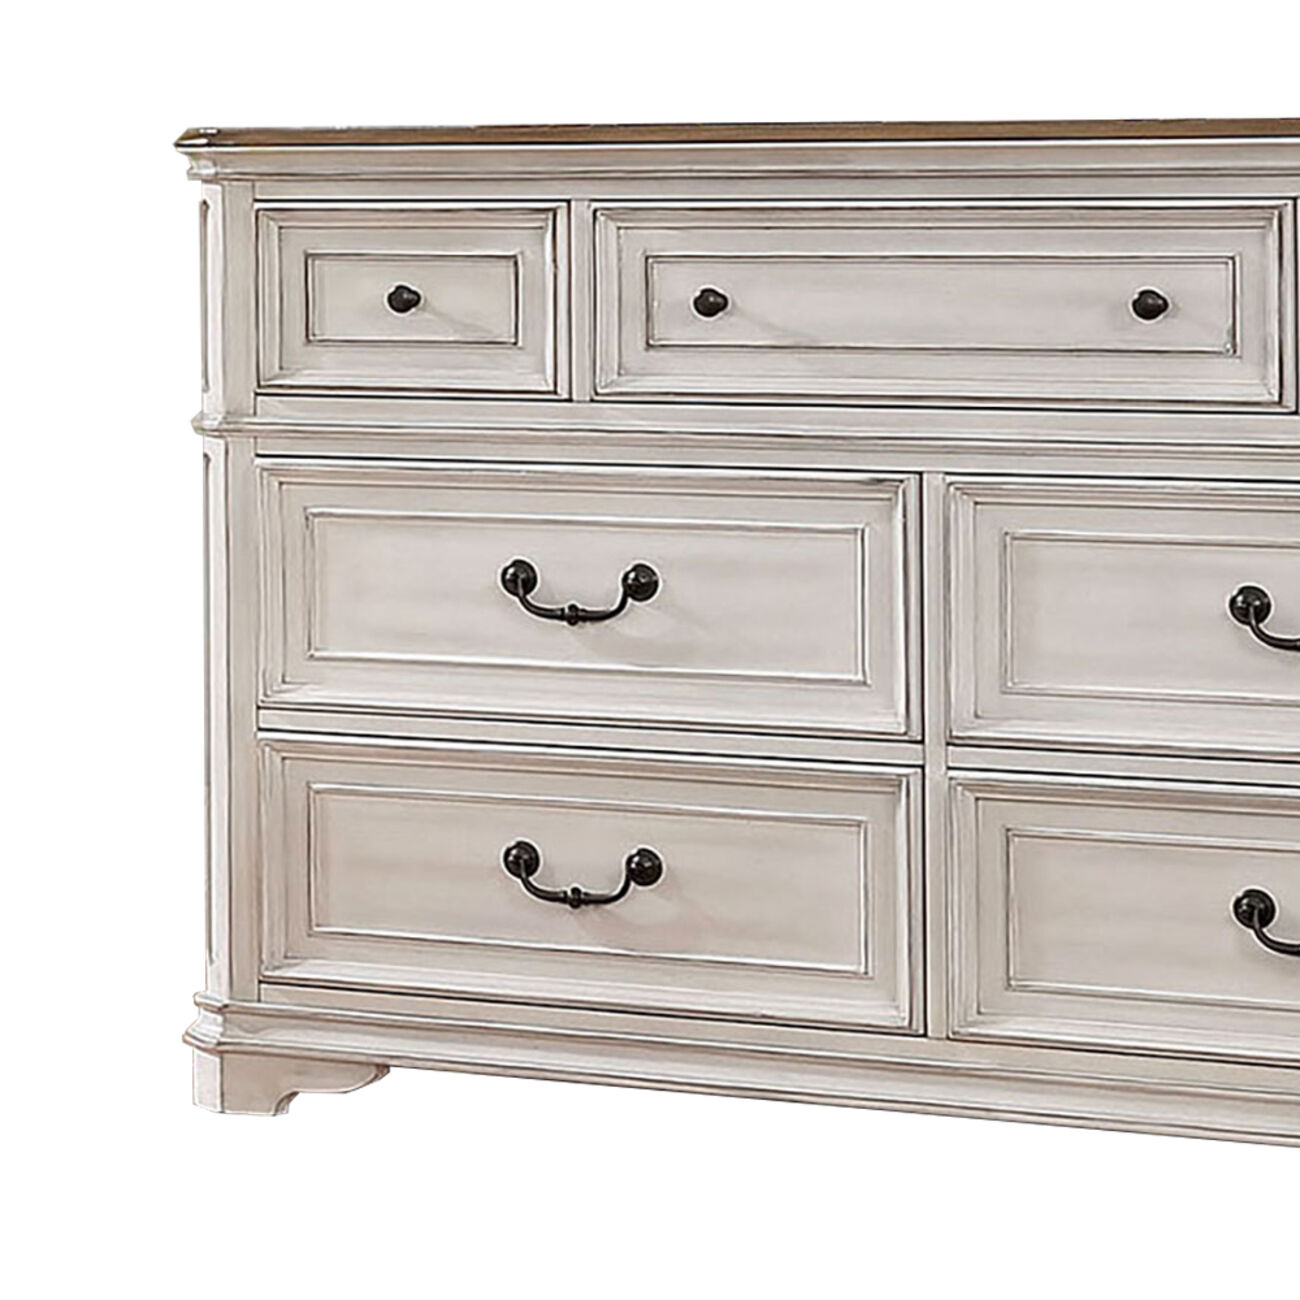 Transitional Wooden Dresser with 7 Drawers and Bracket Legs, White